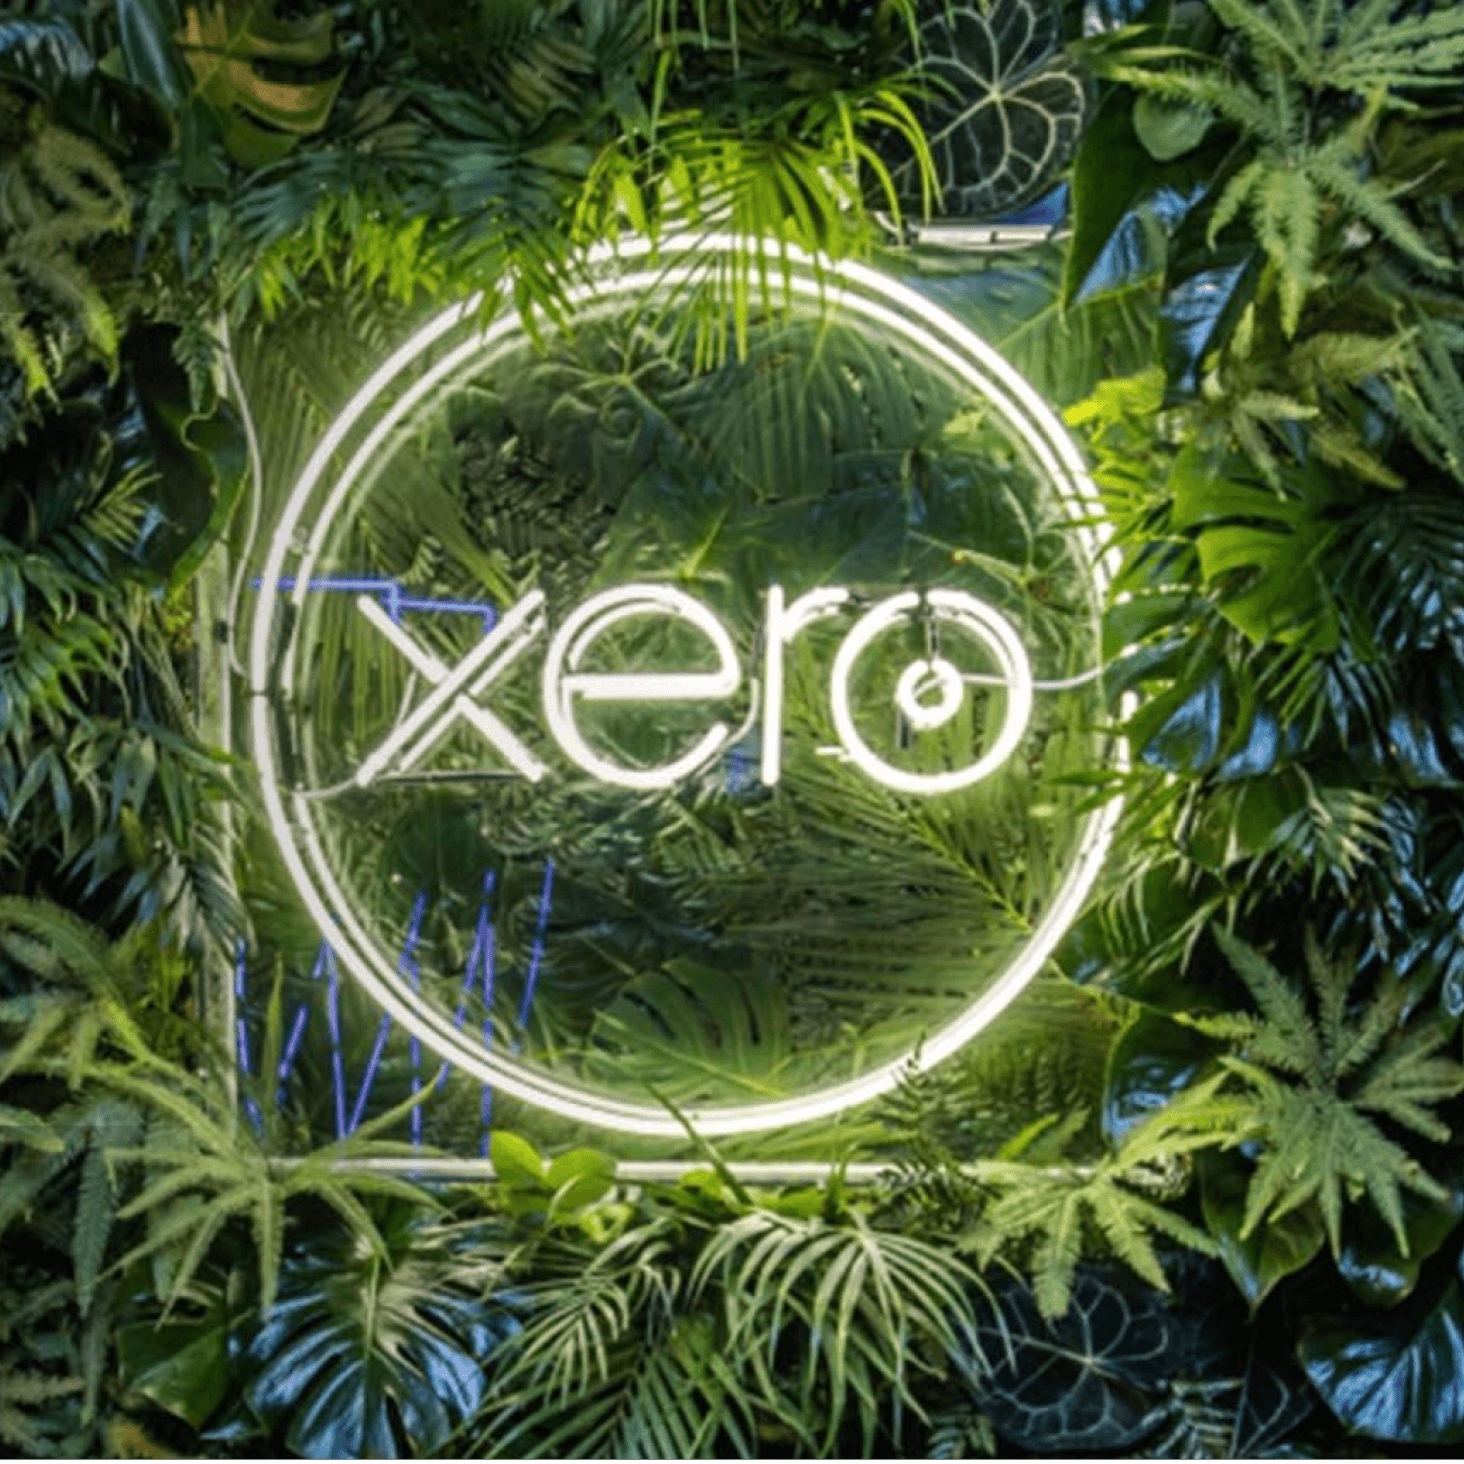 The Xero logo lights up against a background of greenery at a careers fair stand.